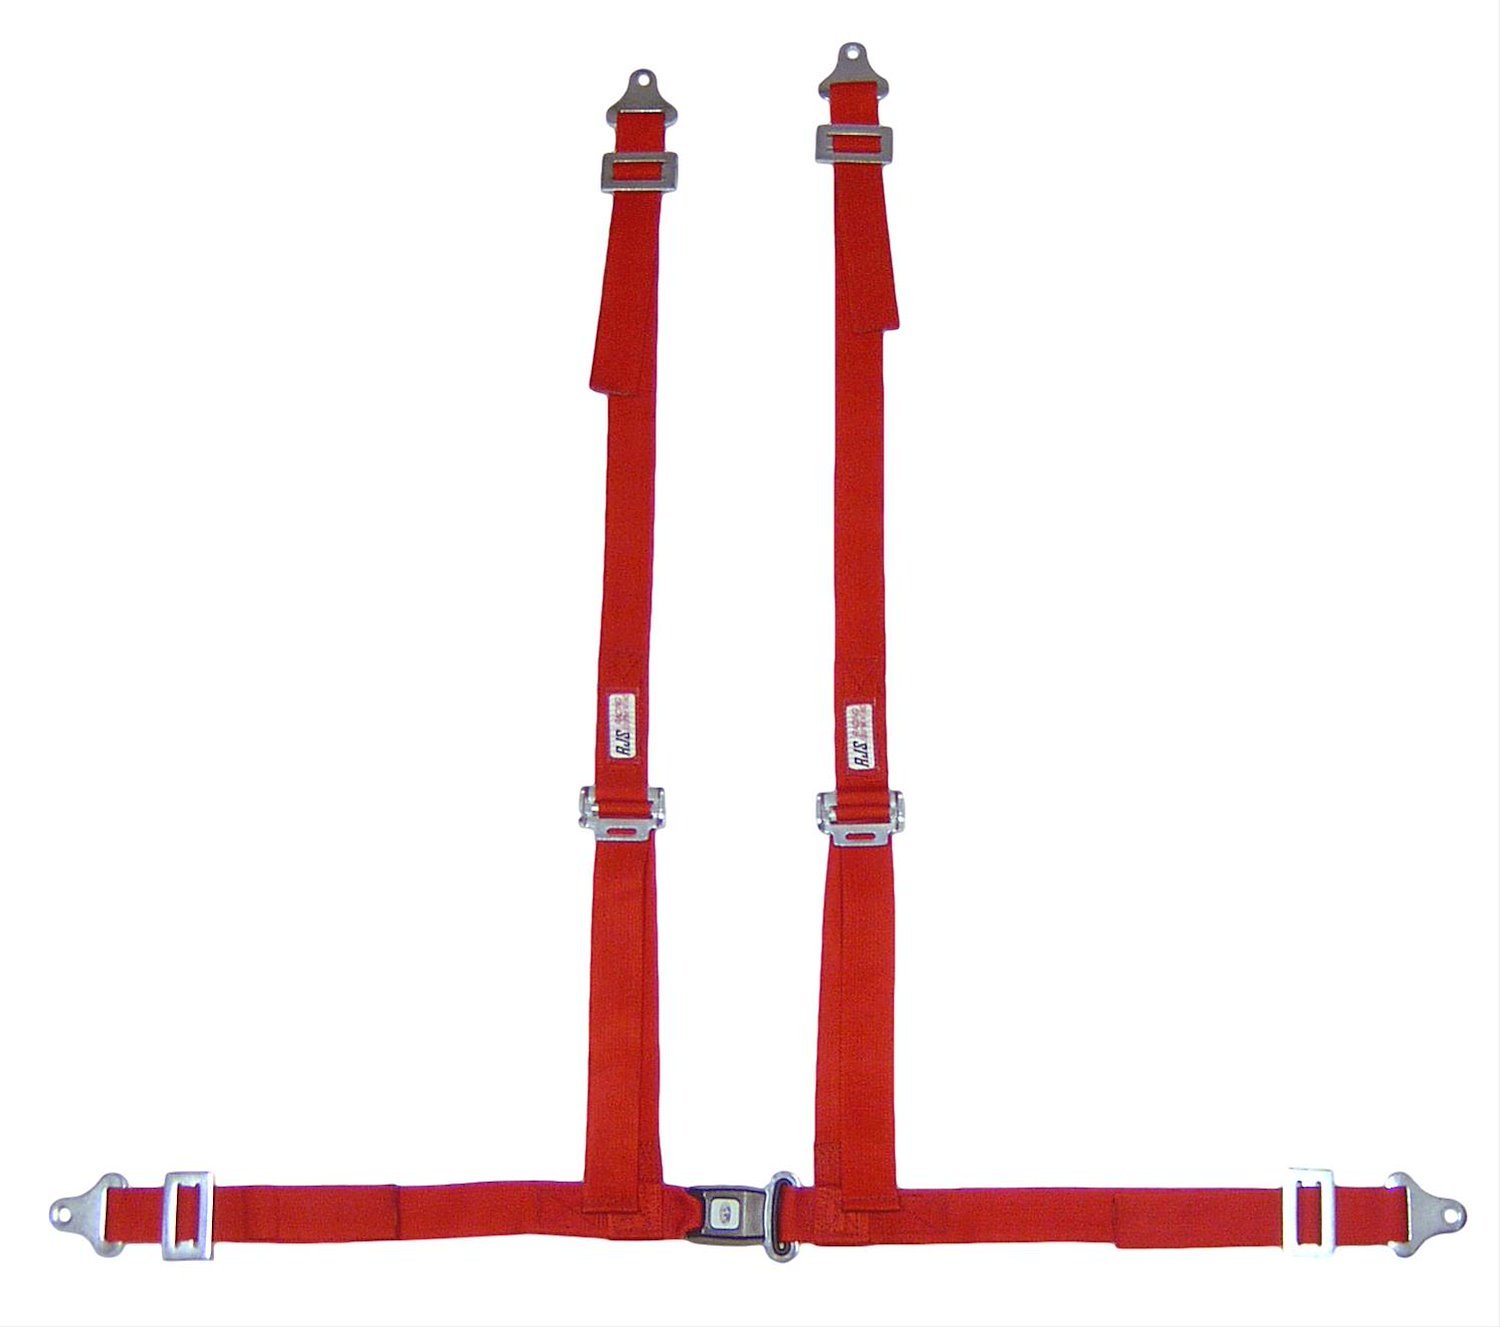 NON-SFI B&T HARNESS 2 PULL UP Lap Belt BOLT 2 S.H. INDIVIDUAL FLOOR Mount WRAP/BOLT RED